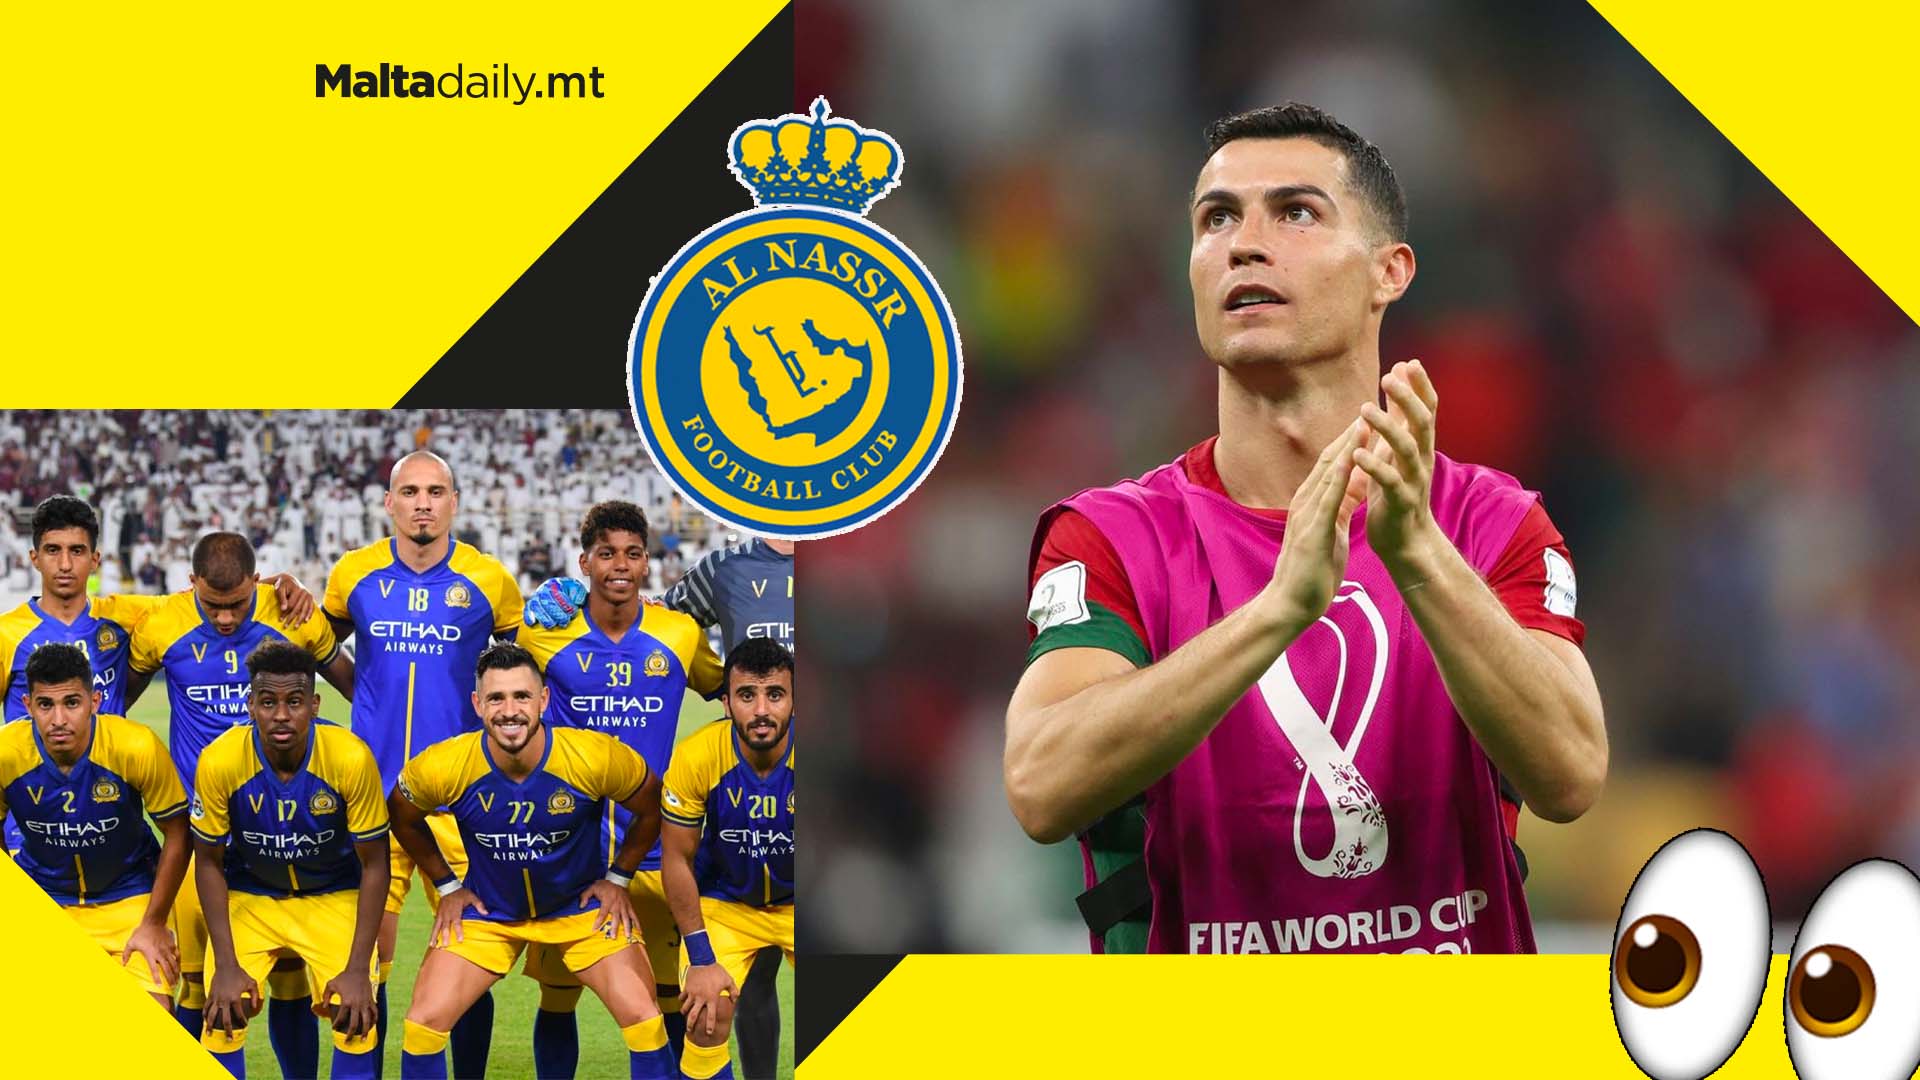 Ronaldo ready to sign a 7 year contract with Al-Nassr and Saudi Arabia